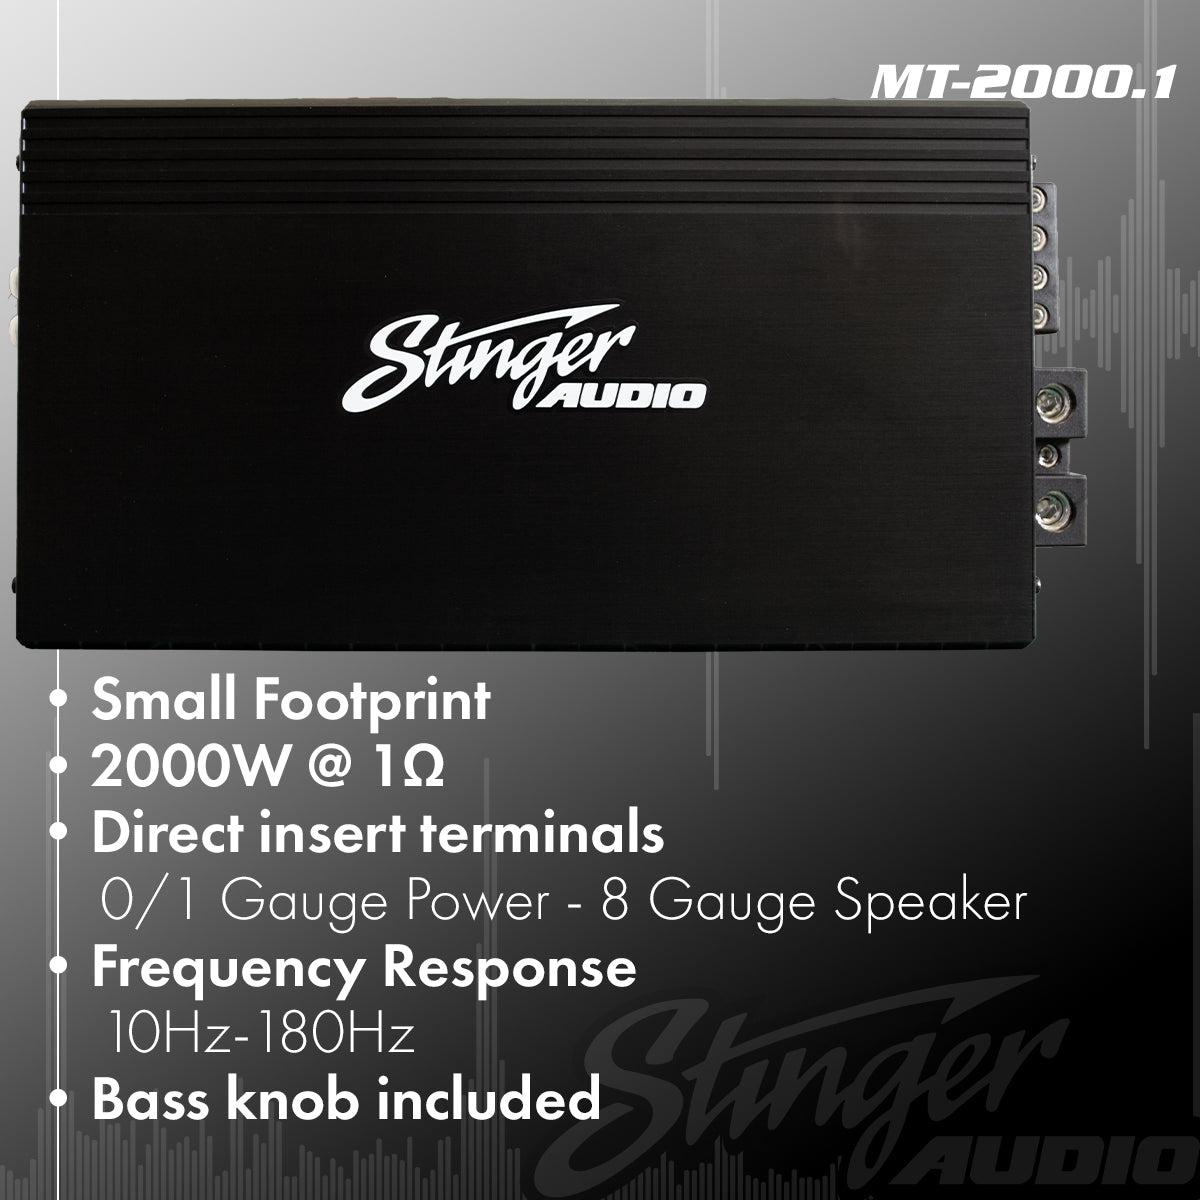 Dual 10" 2,000 Watt (RMS) Loaded Ported Subwoofer Enclosure (2,000 Watts RMS/3,000 Watts Max) Bass Package with Amplifier & Complete Wiring Kit